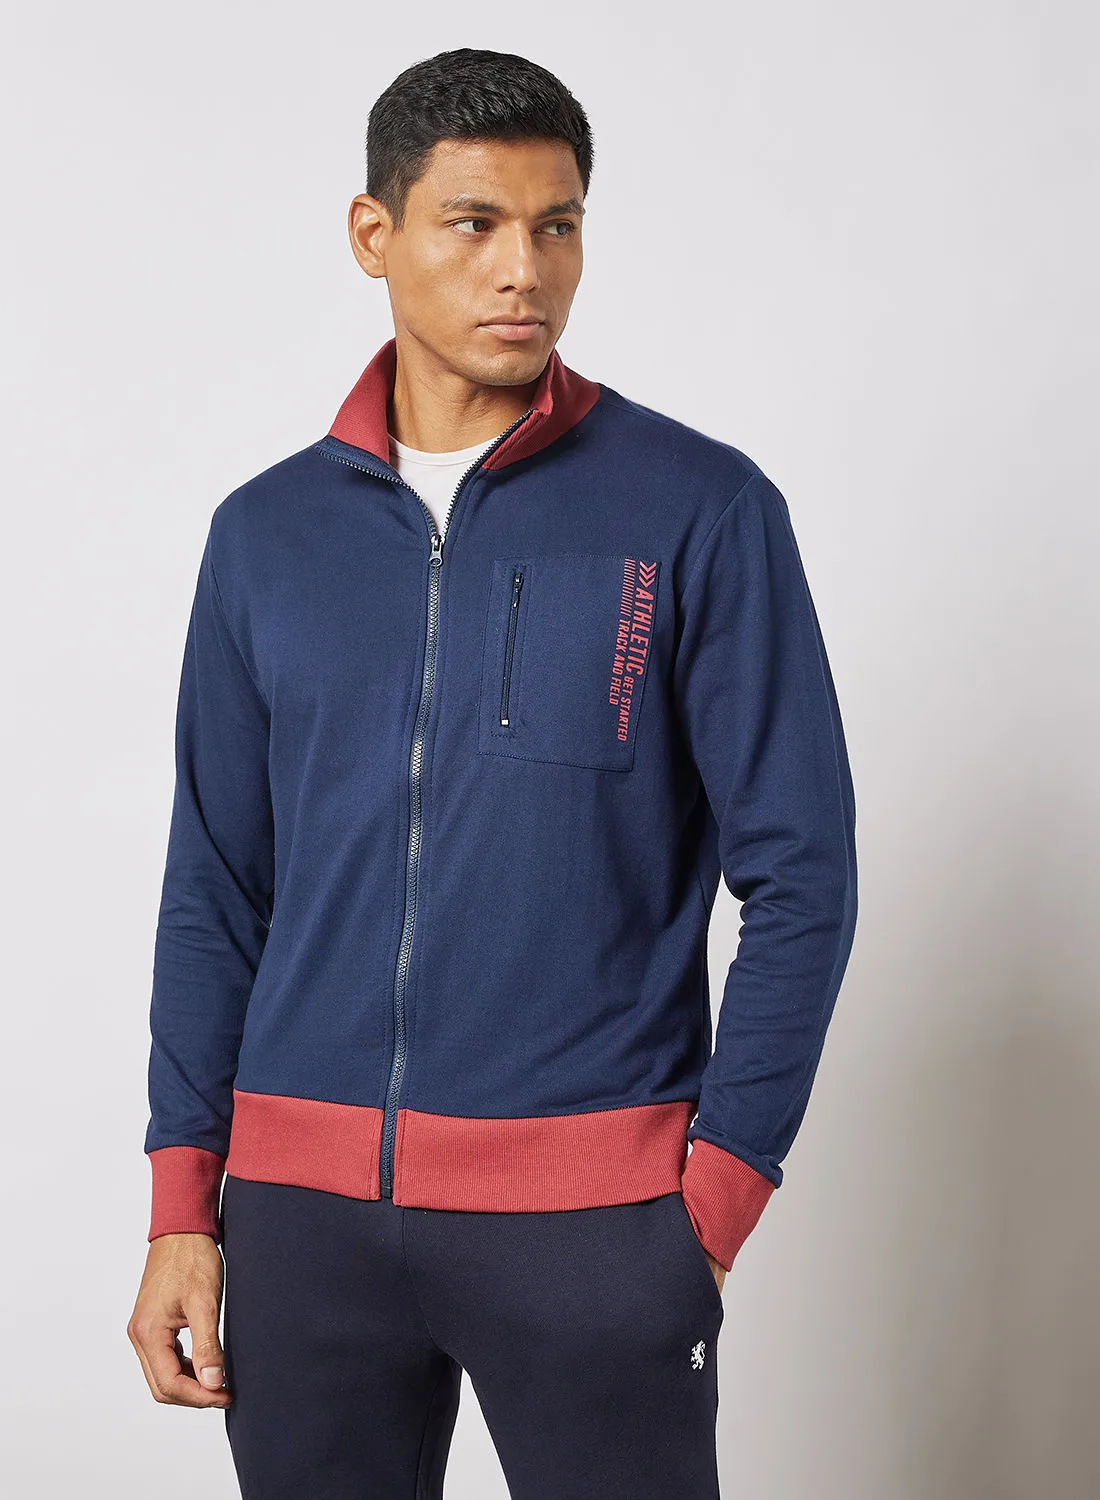 Noon East Men's Long Sleeve High Neck Jacket With Zipper and Contrast Rib Details Navy